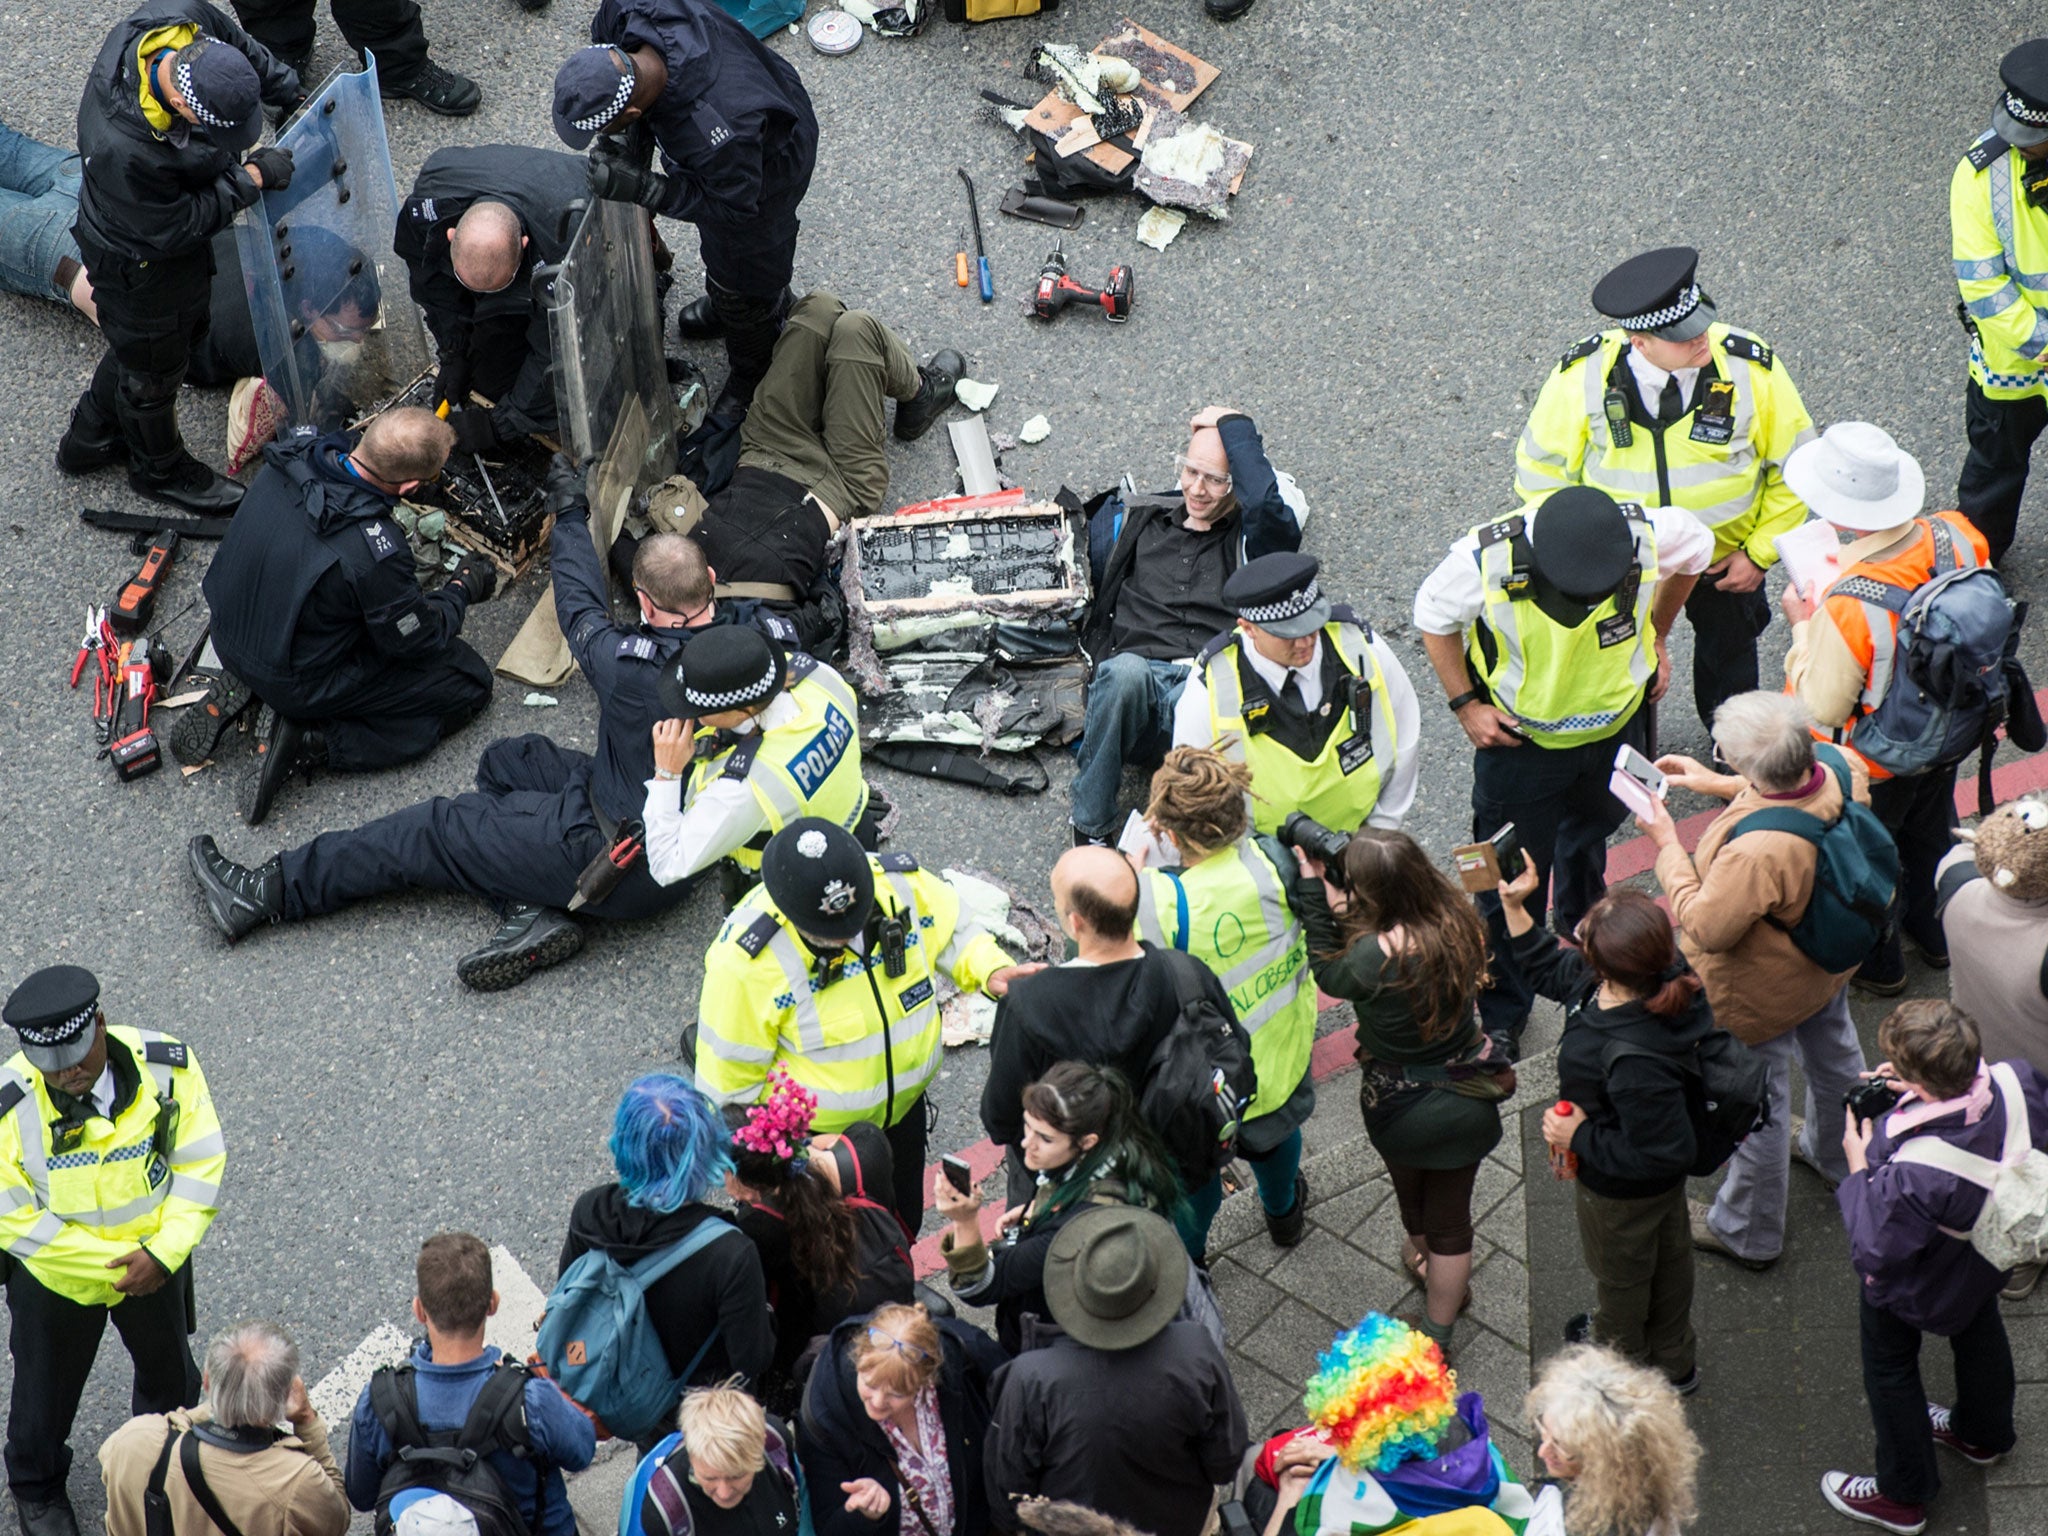 Police work to remove protesters who blocked an access road to the 2017 Defence and Security Equipment International (DSEI) arms fair by chaining themselves together on 6 September 2017